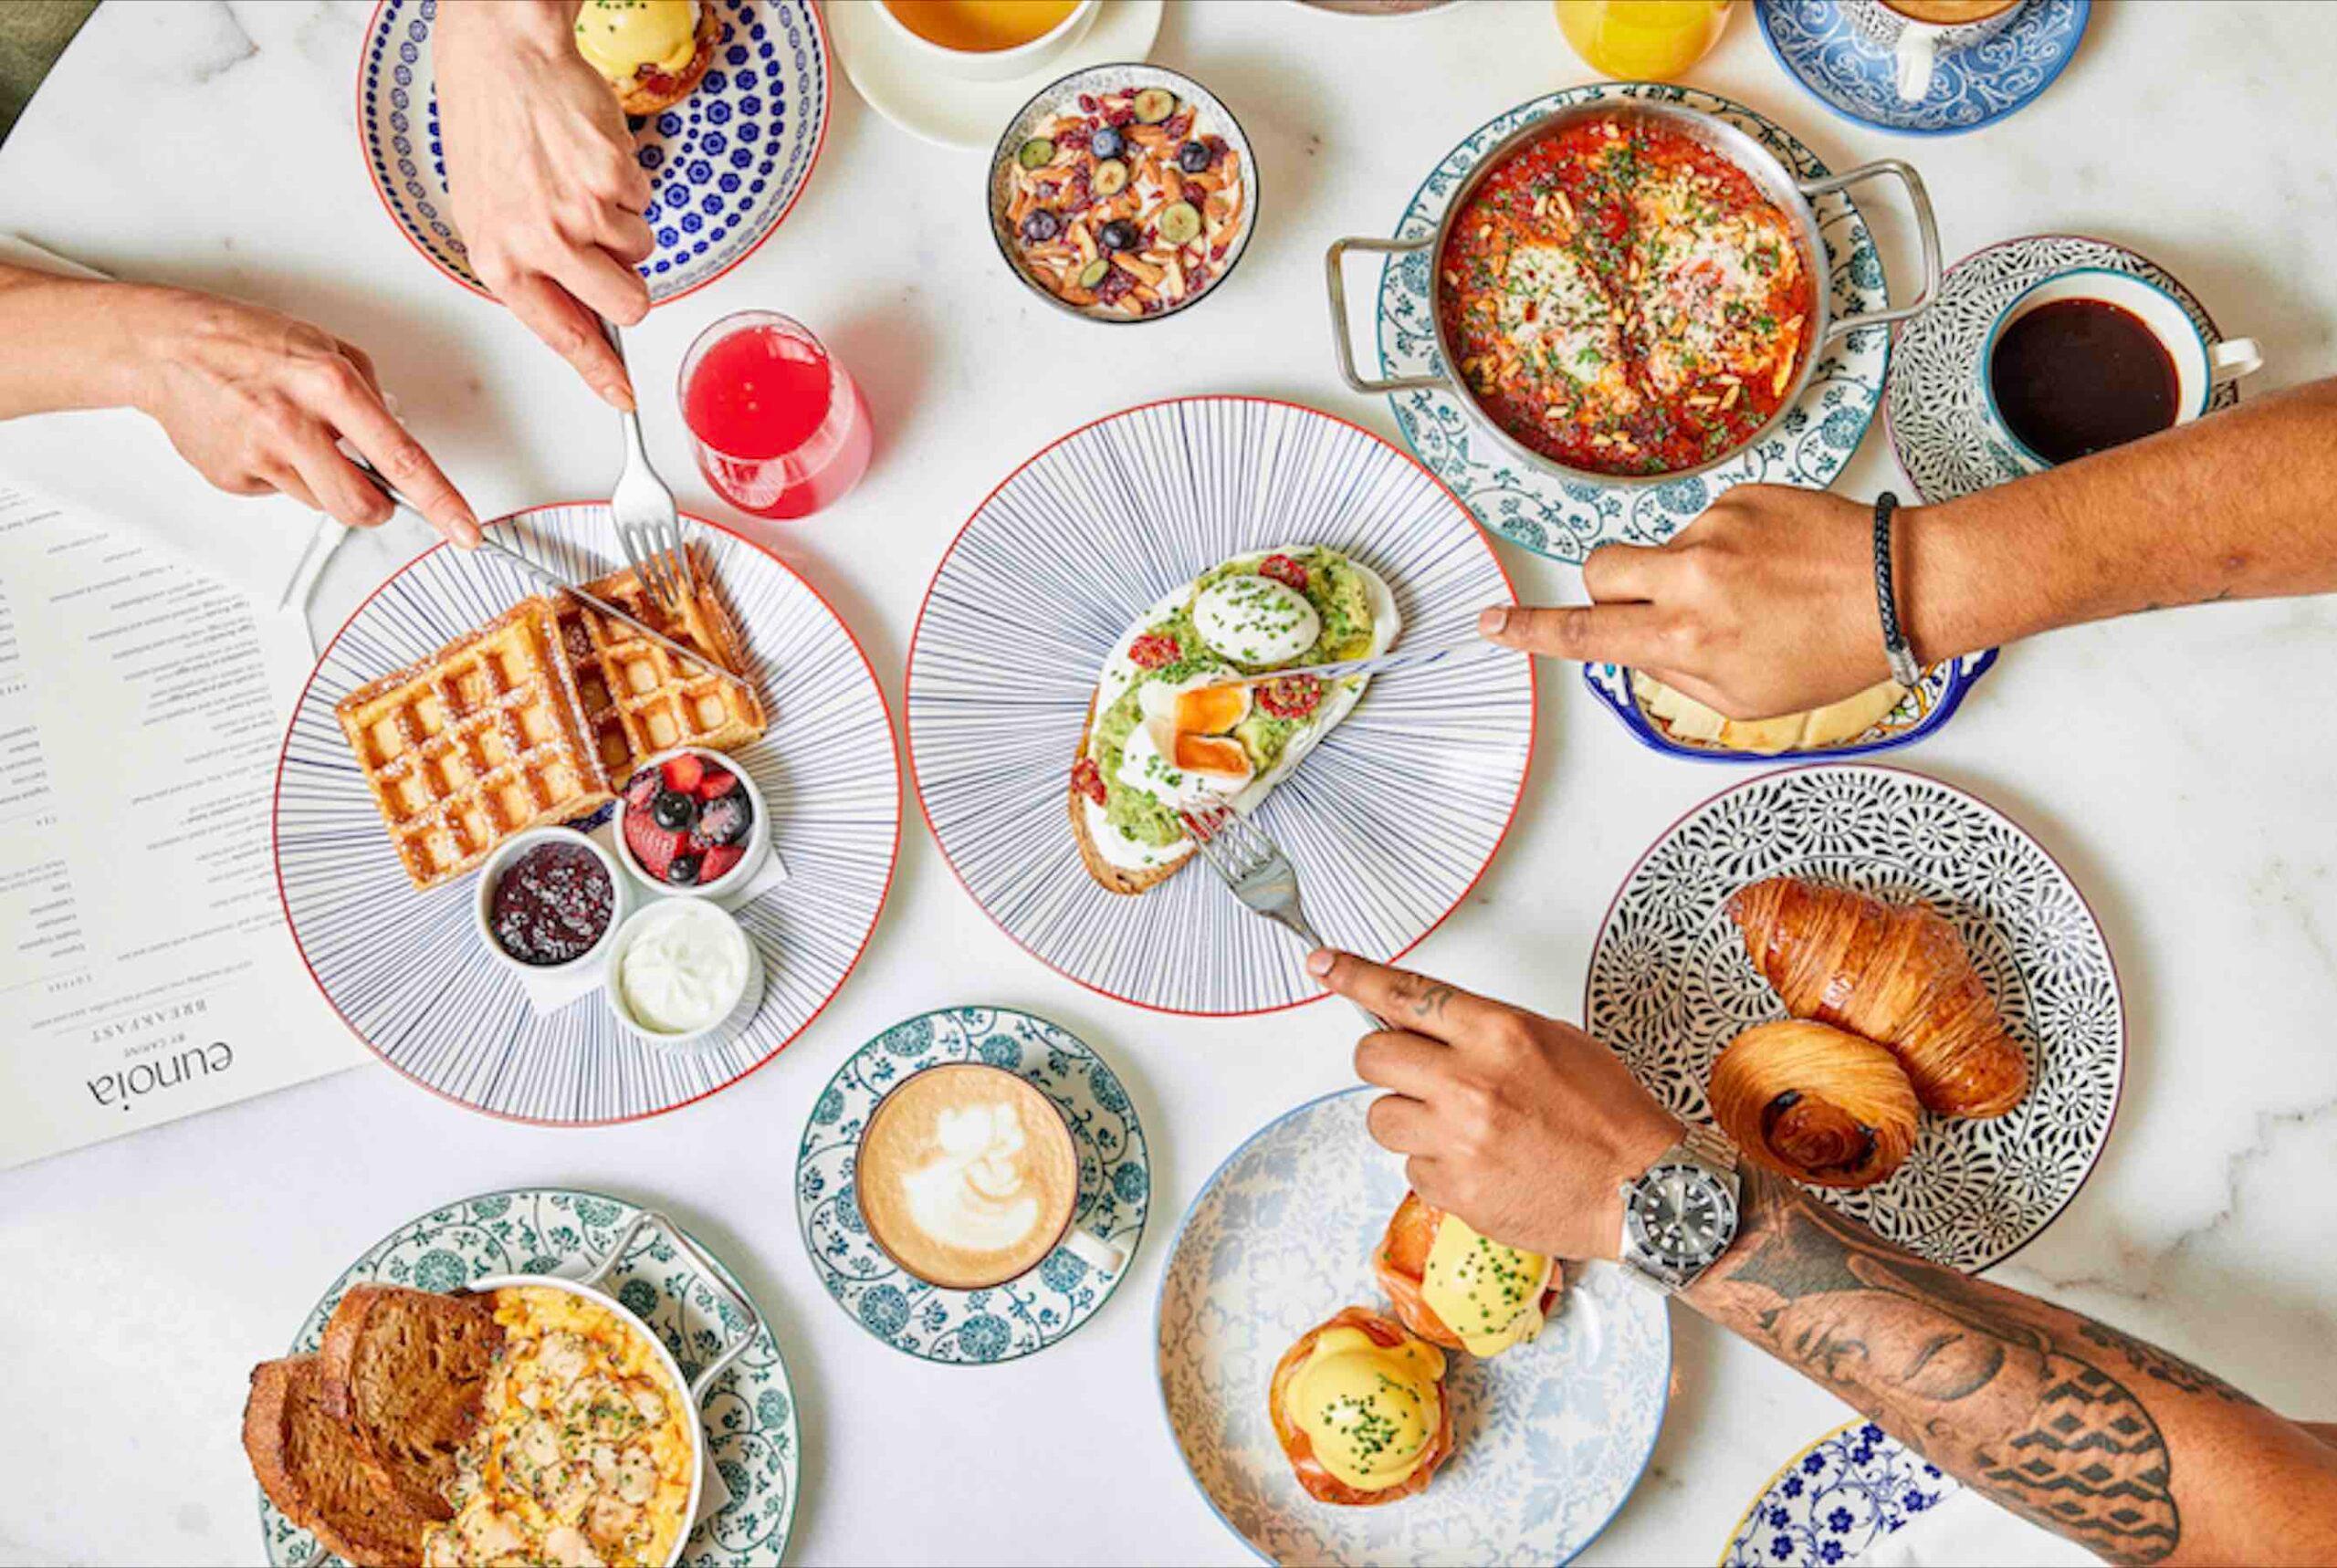 35 of the best breakfasts in Dubai: Croissants, crêpes and coffee